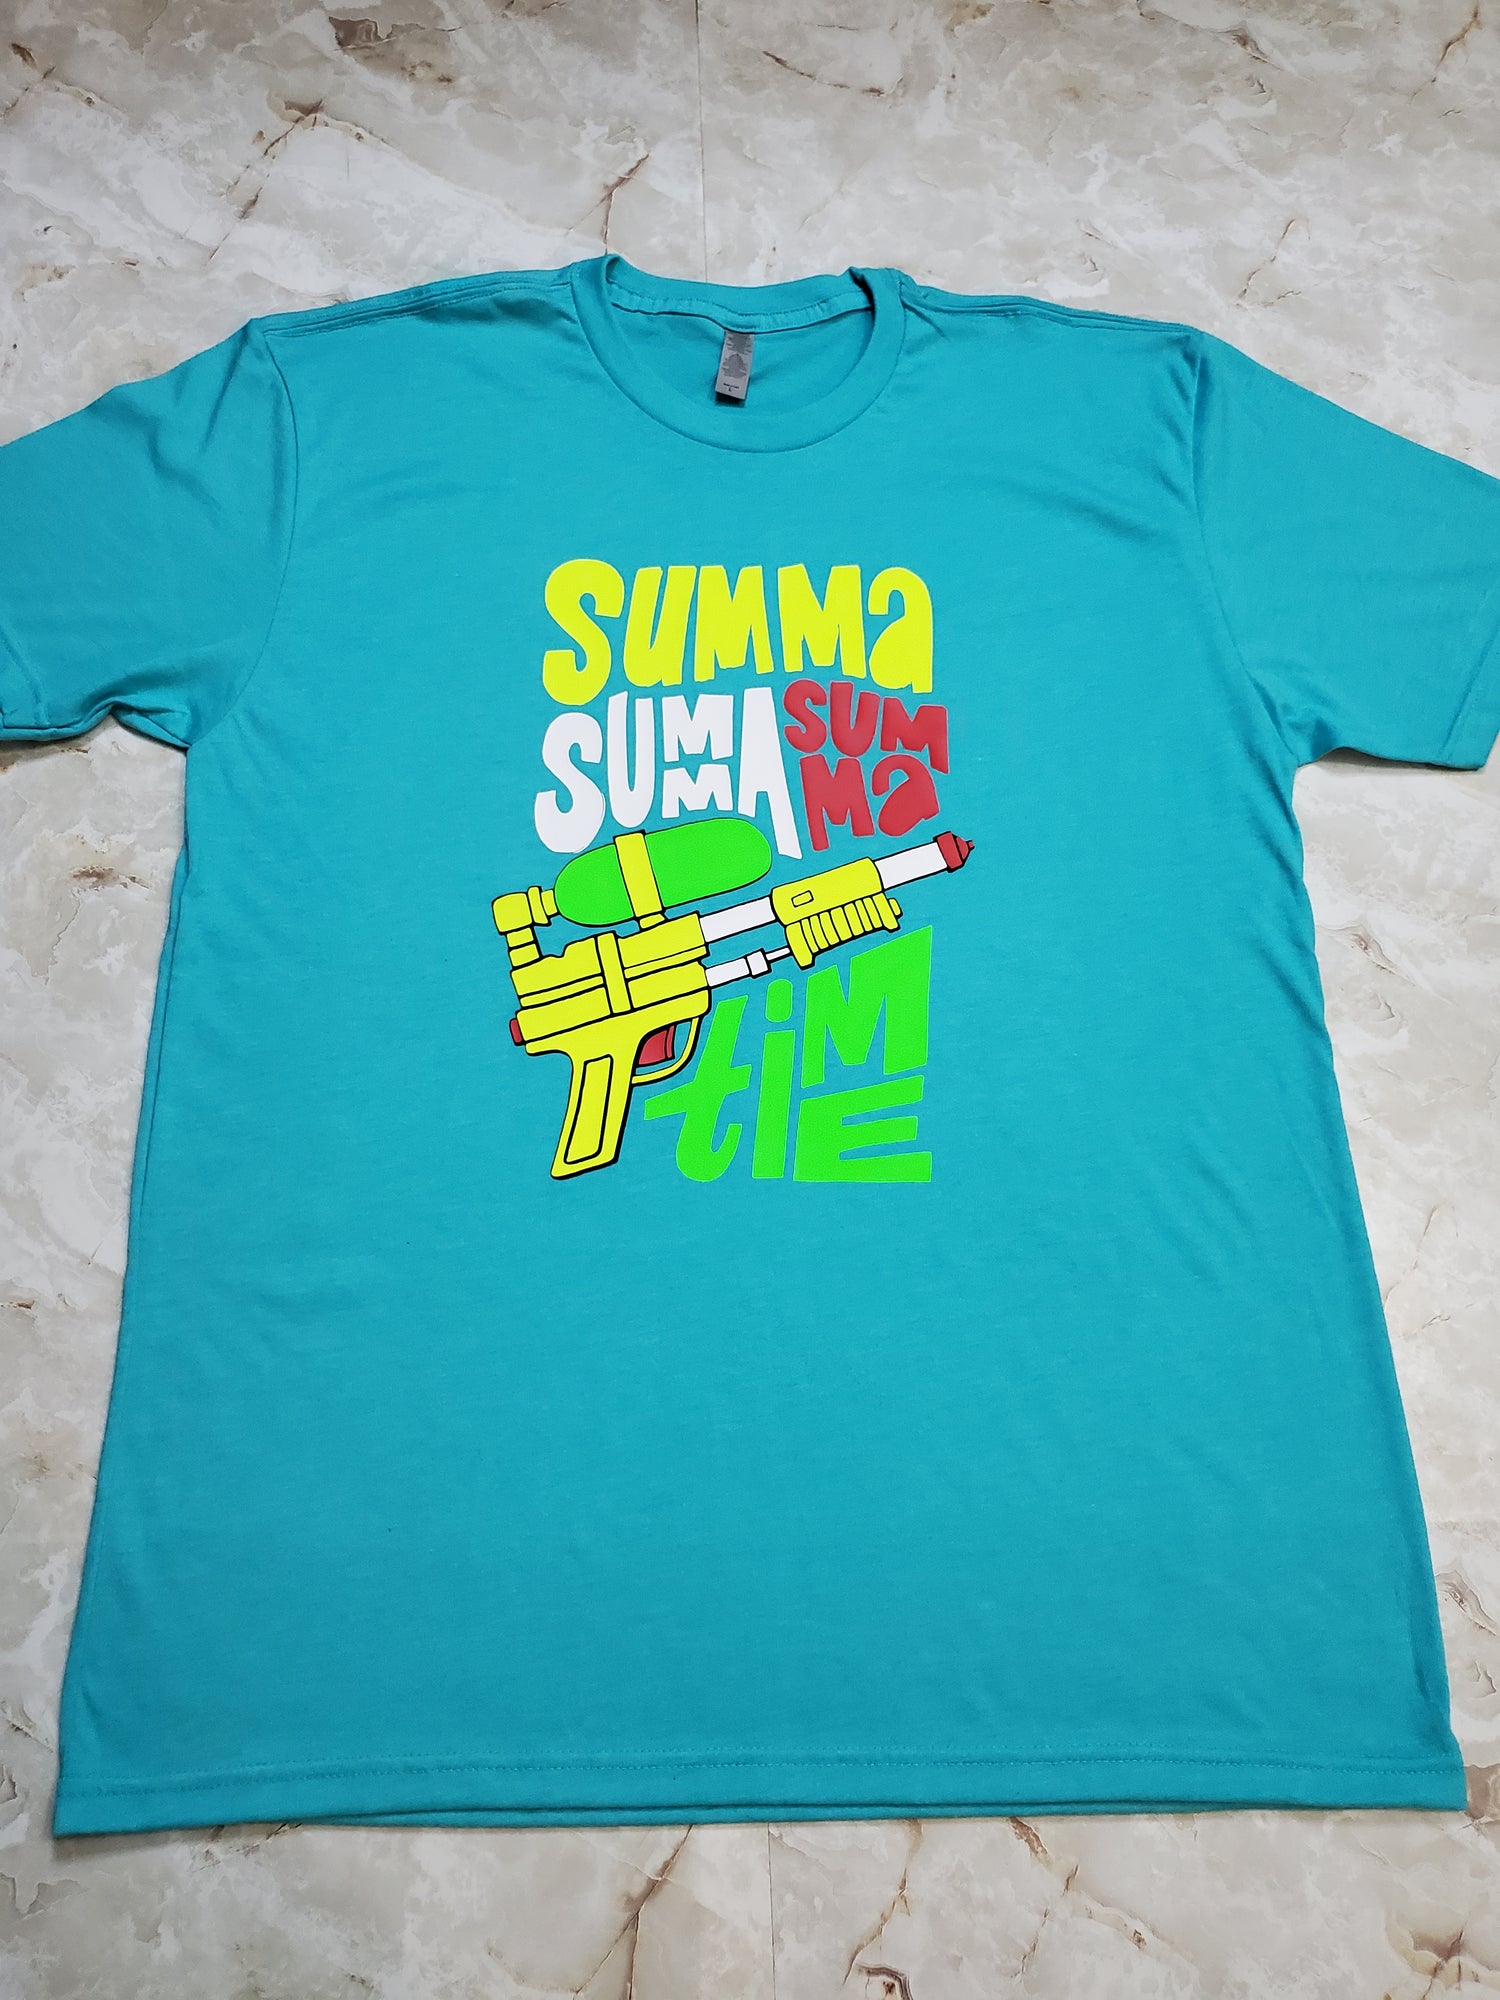 Summa Time T-Shirt (Day) - Centre Ave Clothing Co.